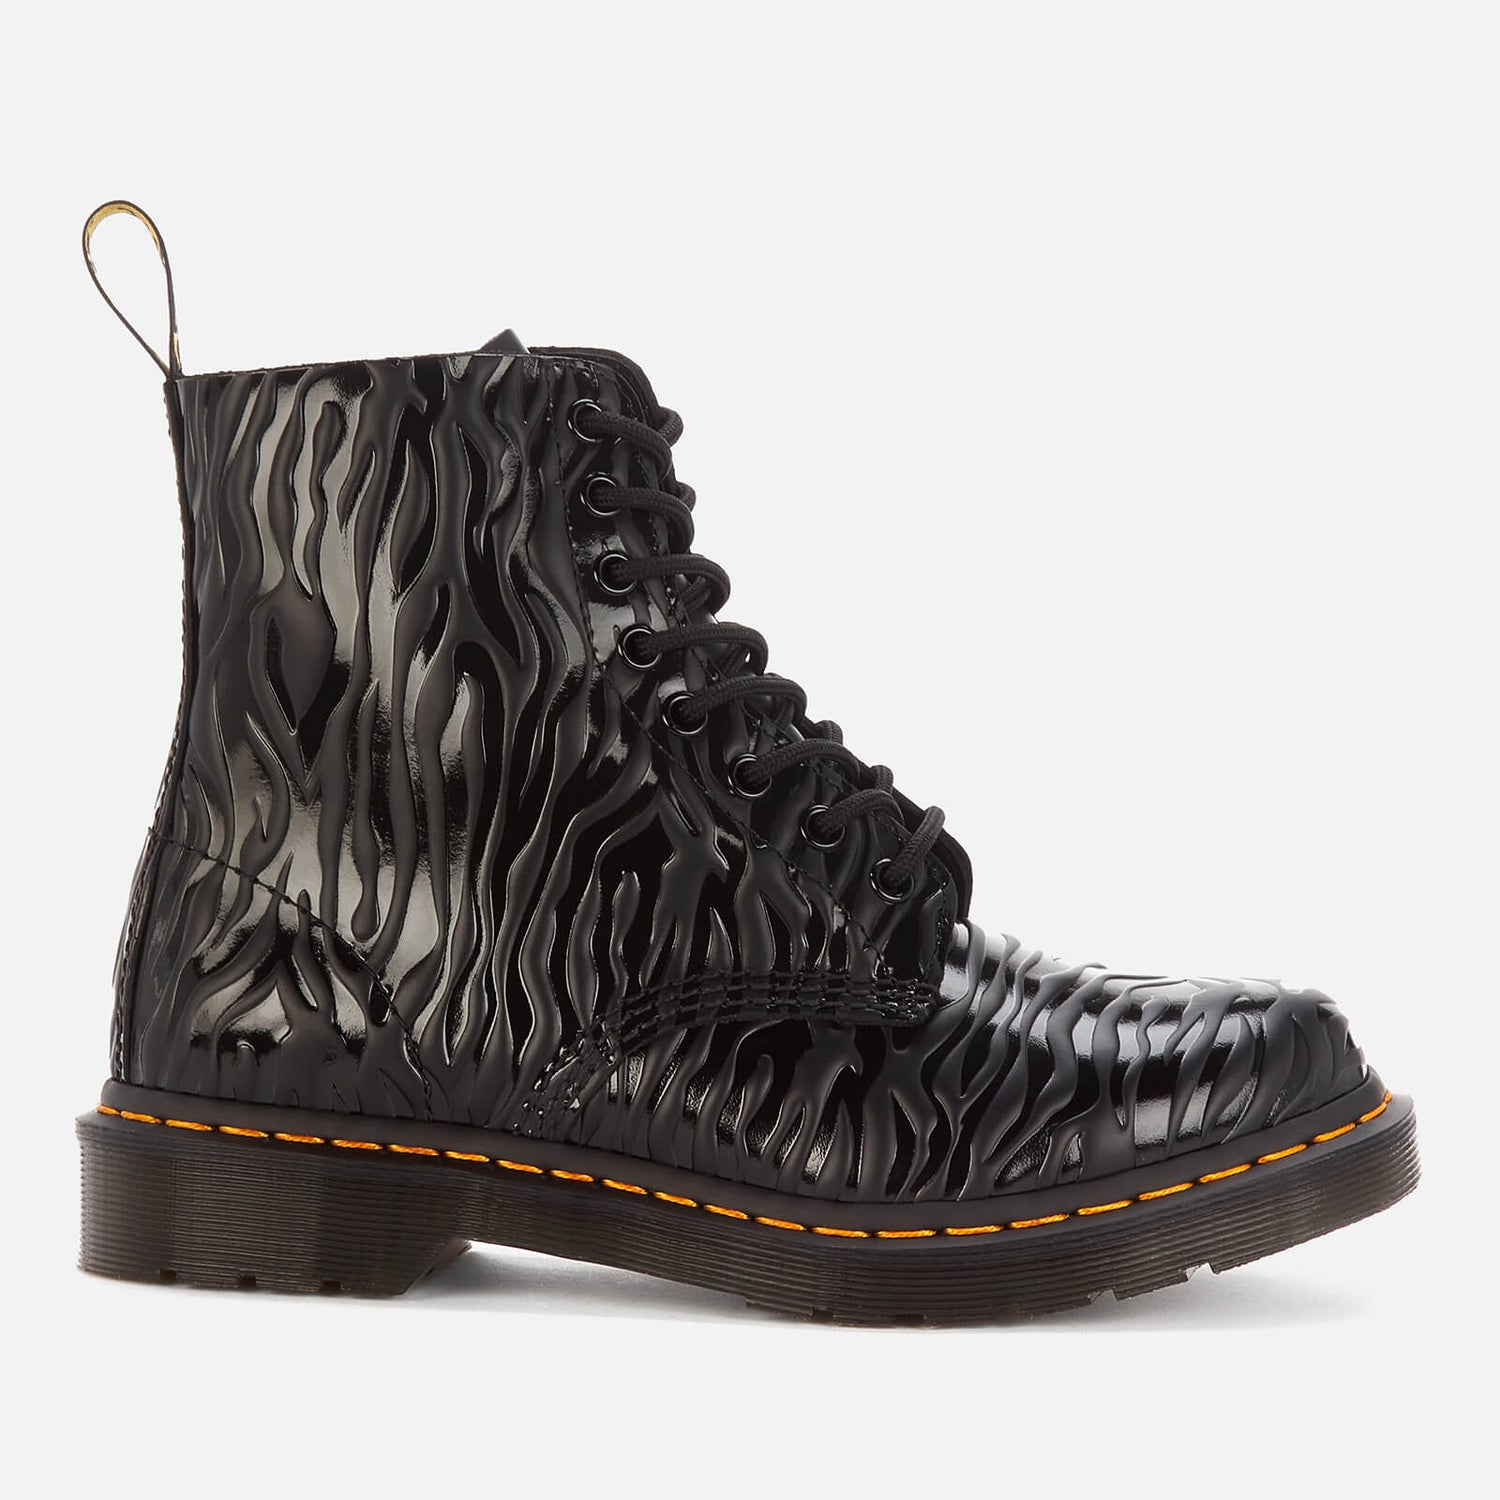 Dr. Martens Women's 1460 Embossed Leather Pascal Boots - Black Zebra